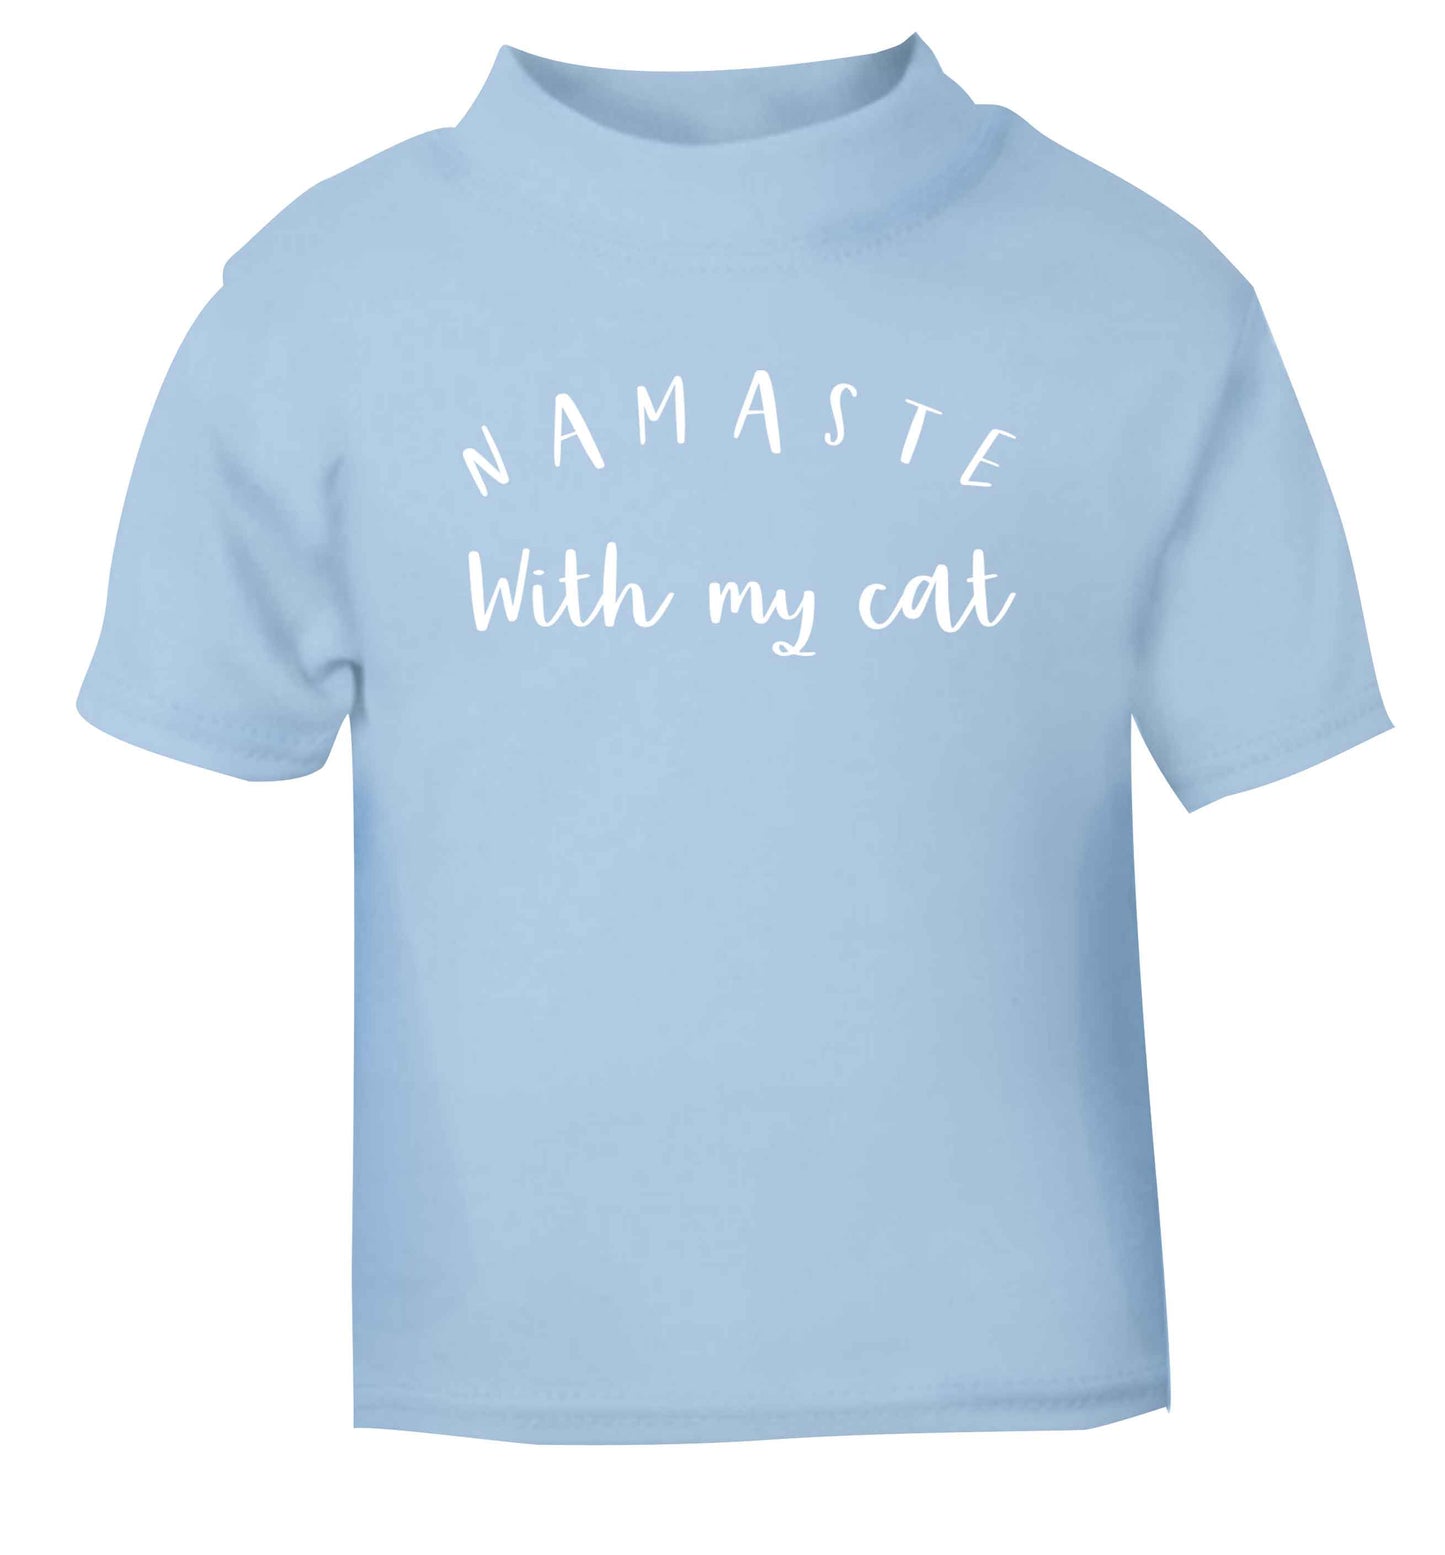 Namaste with my cat light blue Baby Toddler Tshirt 2 Years